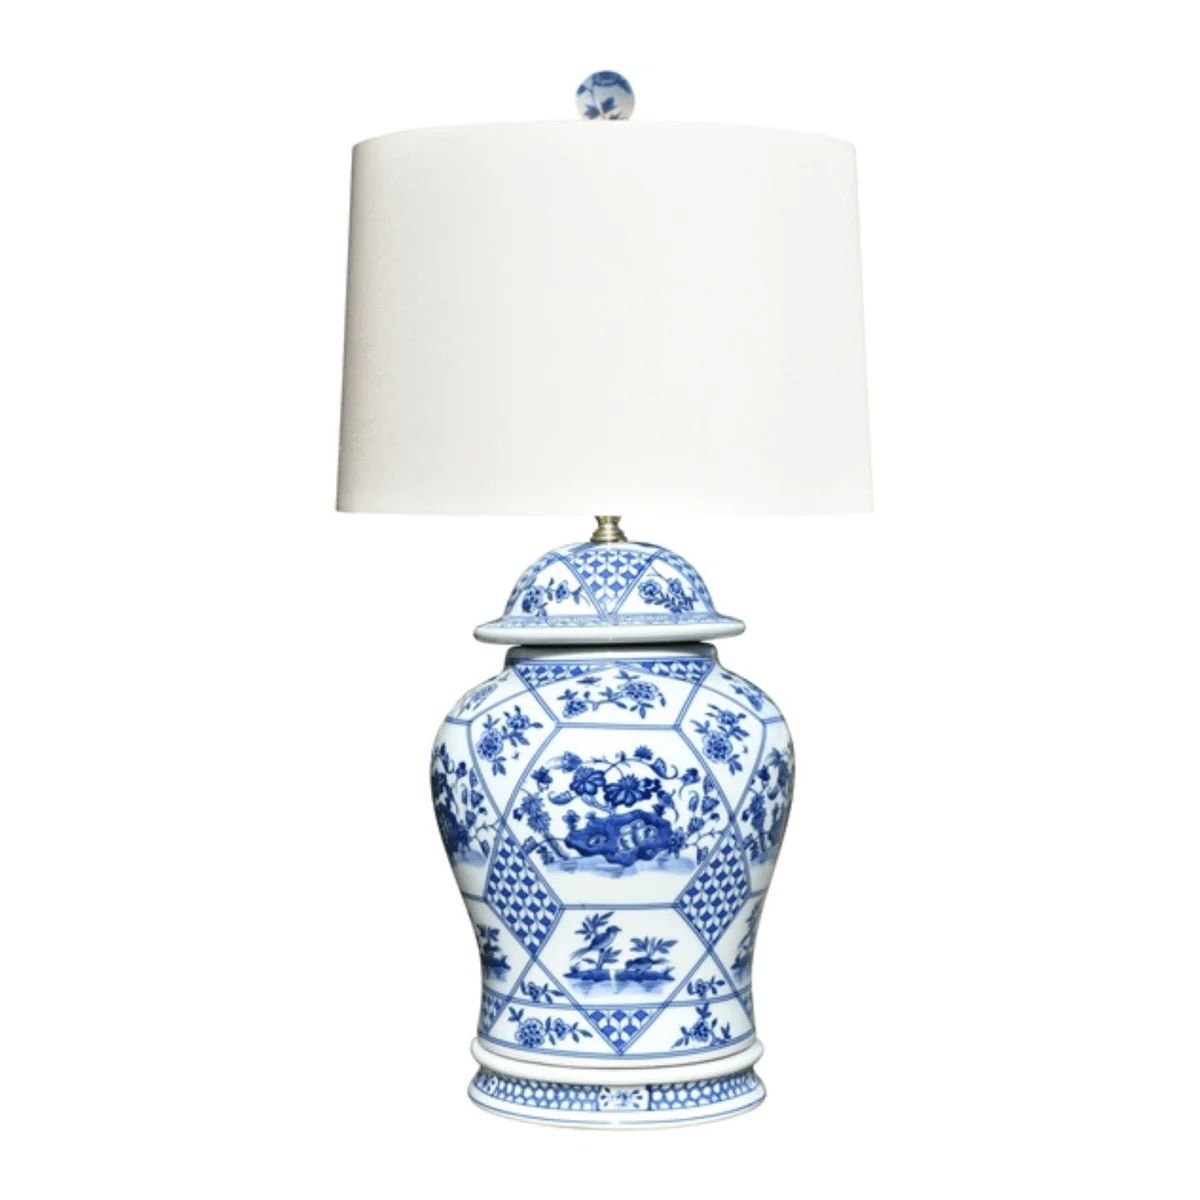 Blue & White Porcelain Temple Jar Lamp With Matching Porcelain Base | The Well Appointed House, LLC